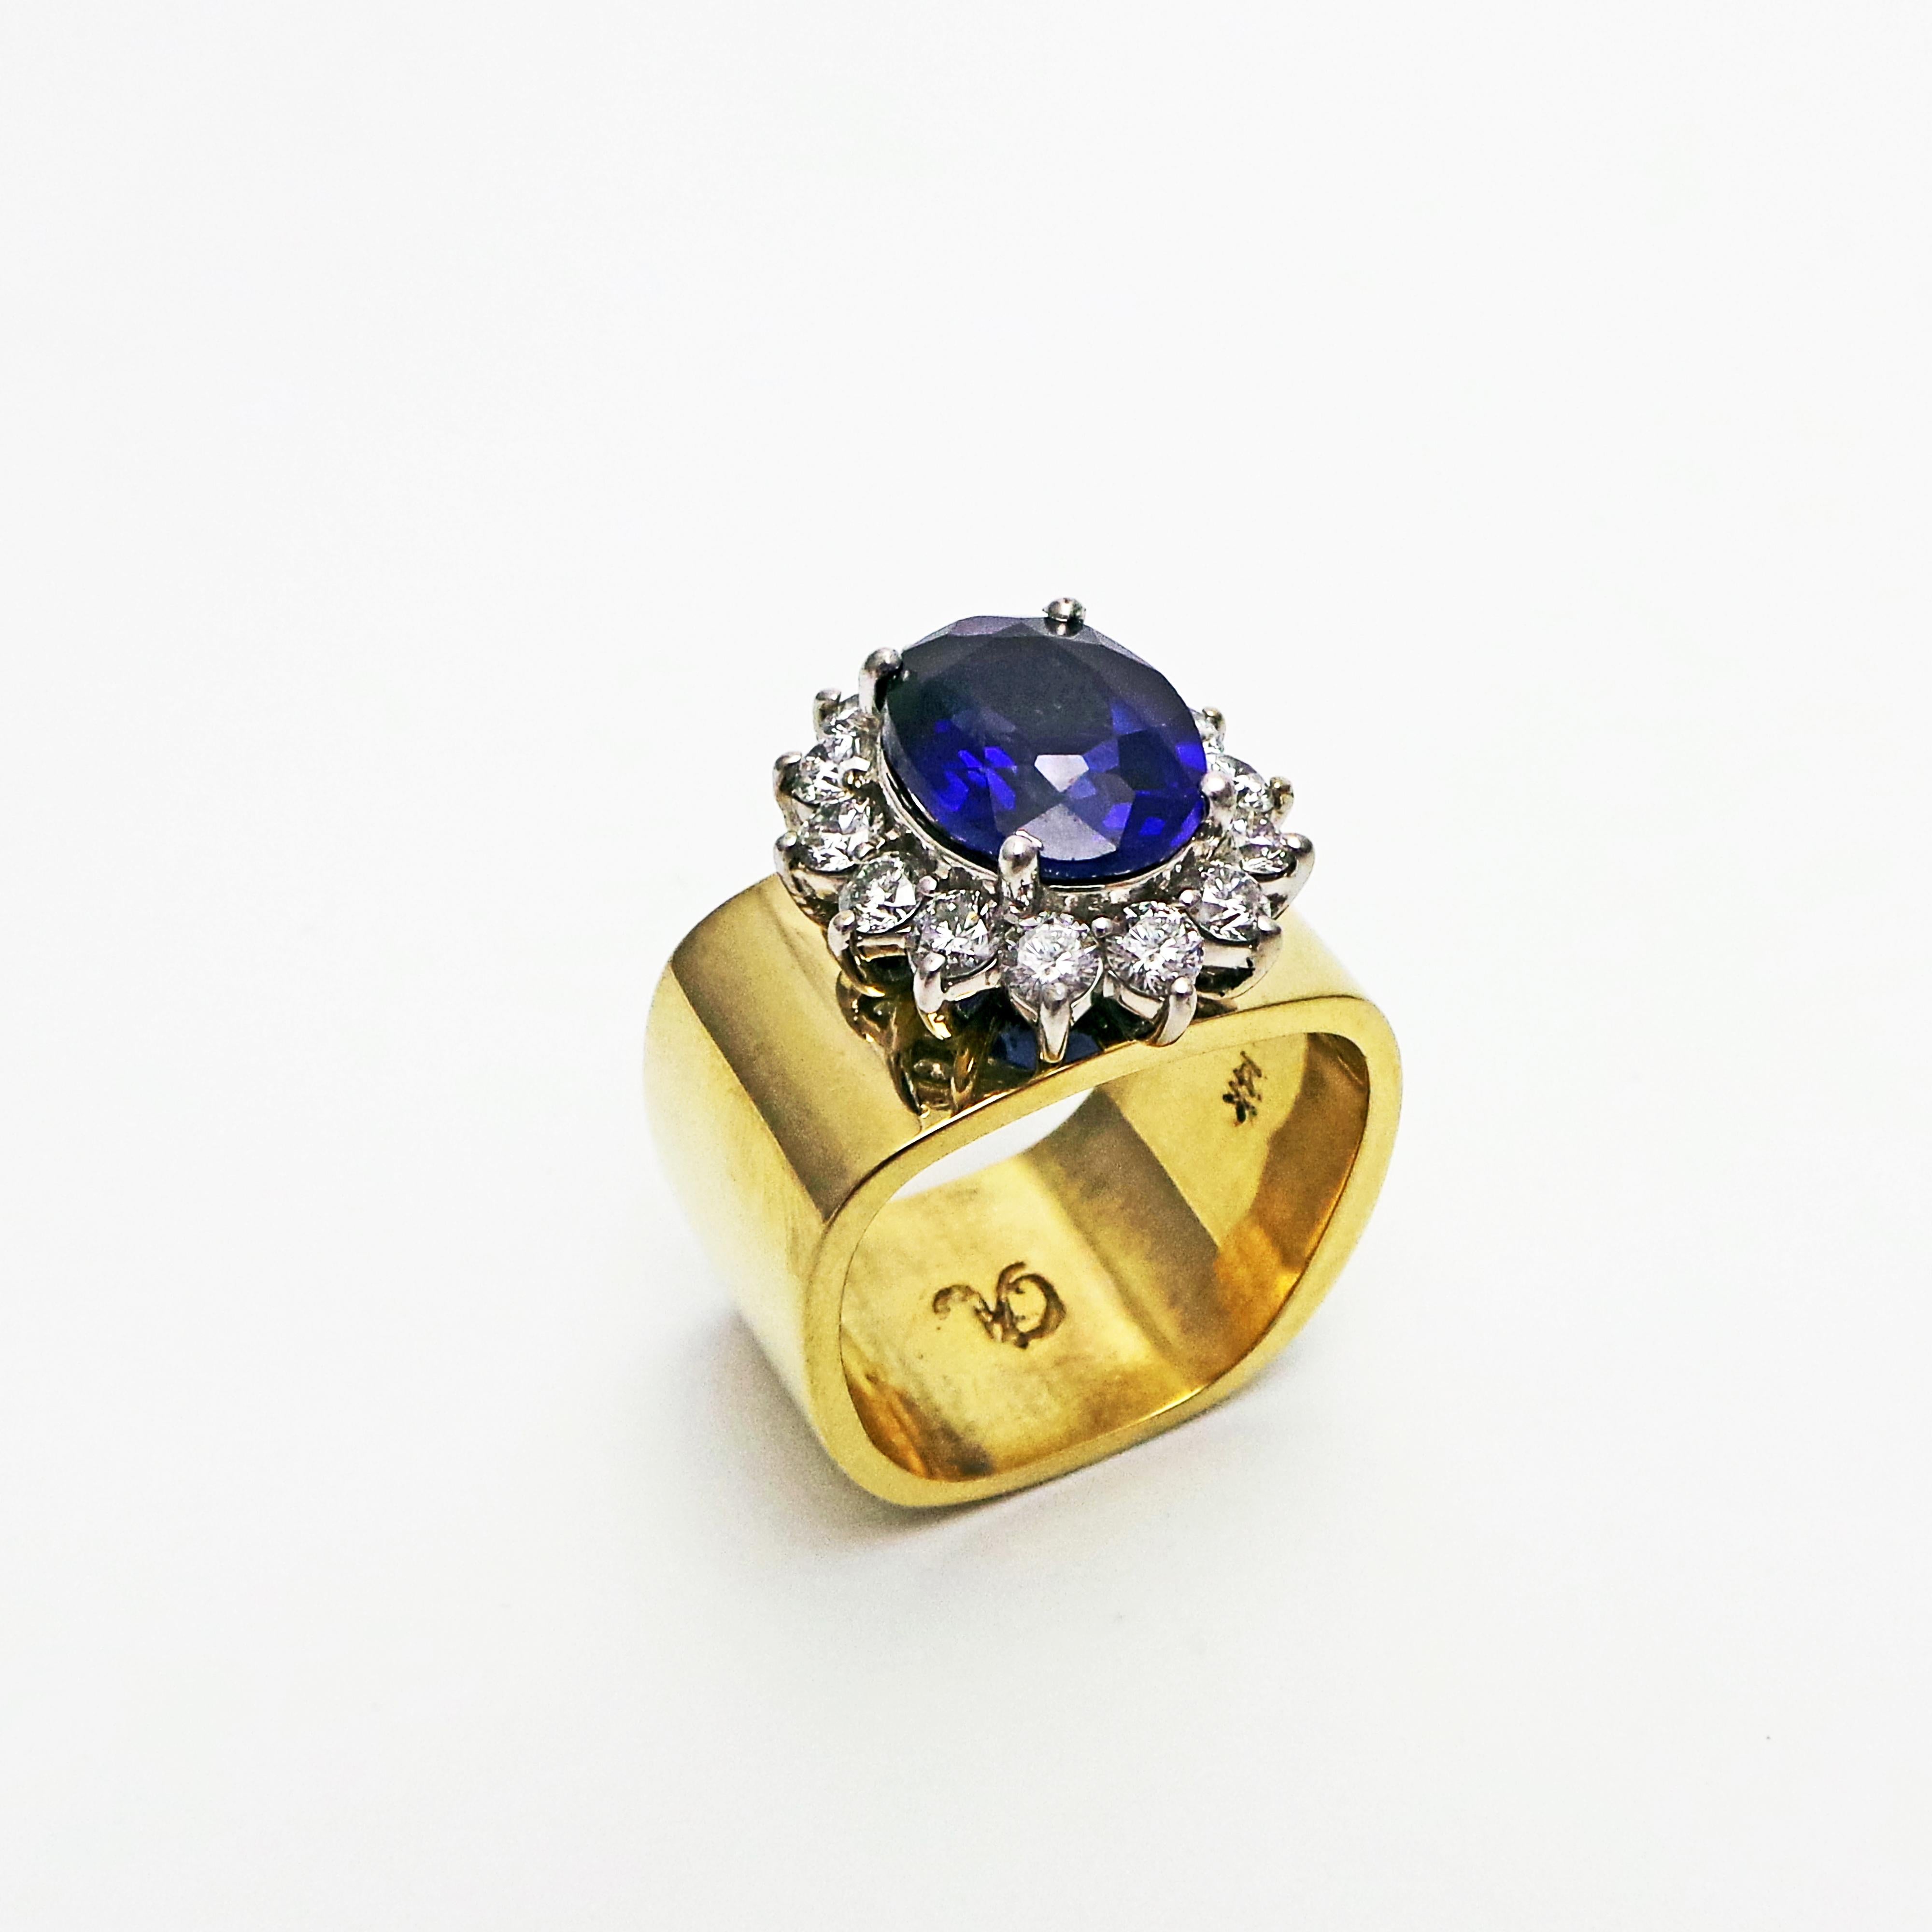 4.27 carat oval Sapphire with Diamond halo (weighing 1.05 carats total, SI2-I1 clarity, G-H color) set in 14k white gold, and mounted onto a solid 14k yellow gold square band. Size 7. Timeless setting with a modern twist.